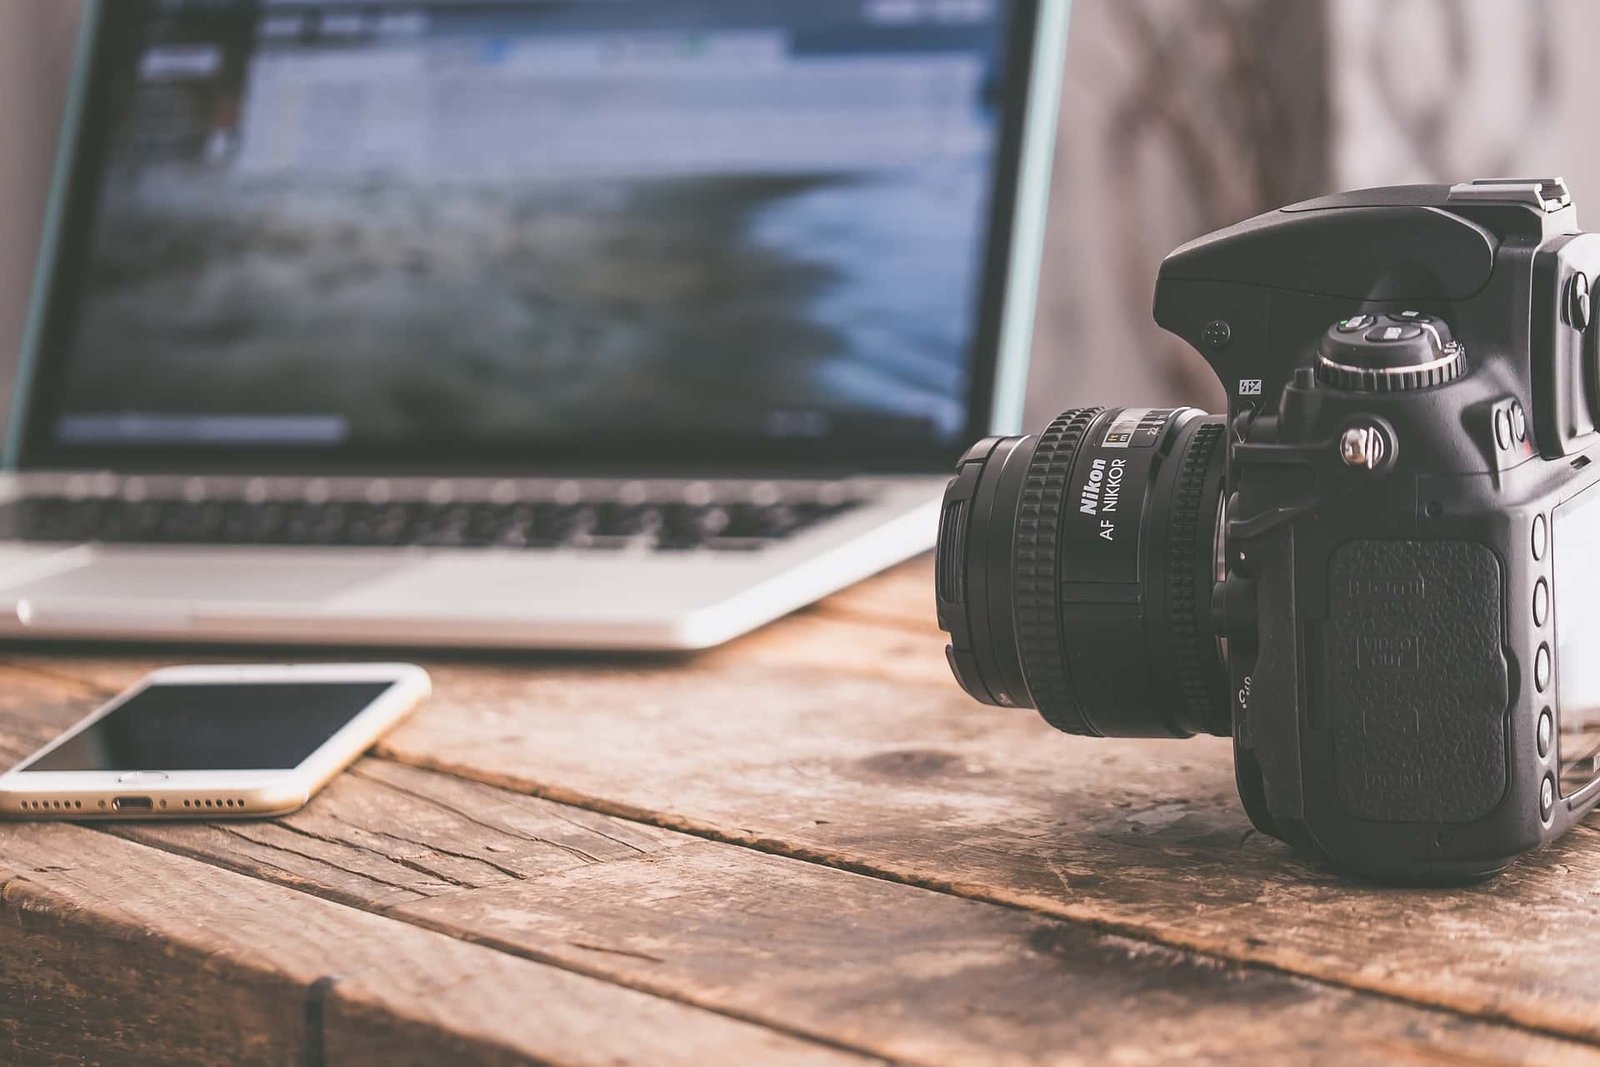 The Best Free Stock Photography Websites